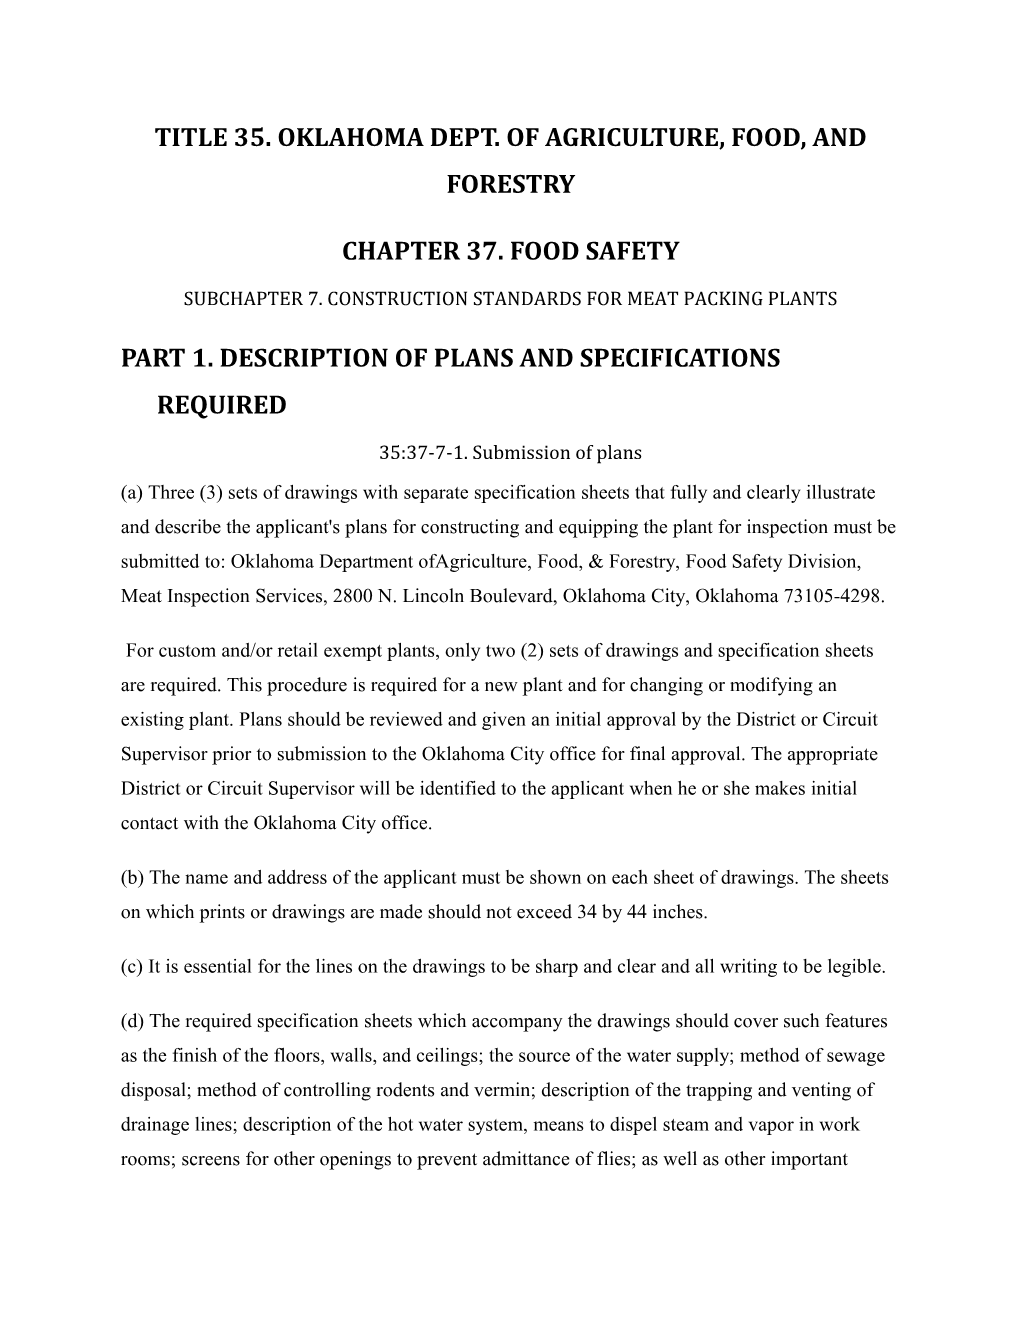 Food Safety Rules, Title 35, Chapter 37, Subsection 7